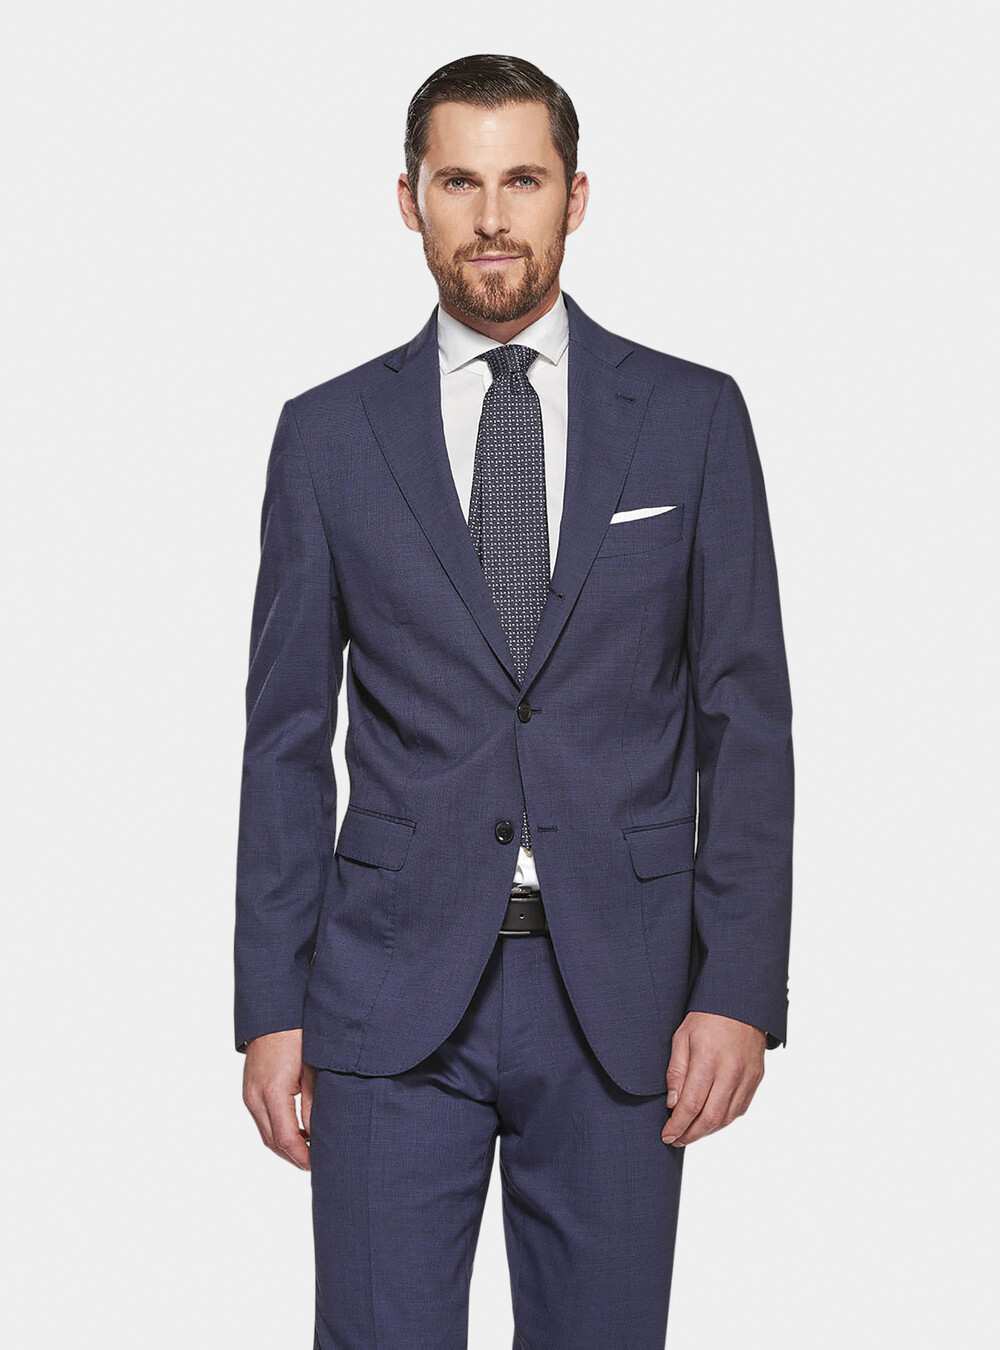 Cool wool and micro patterns suit